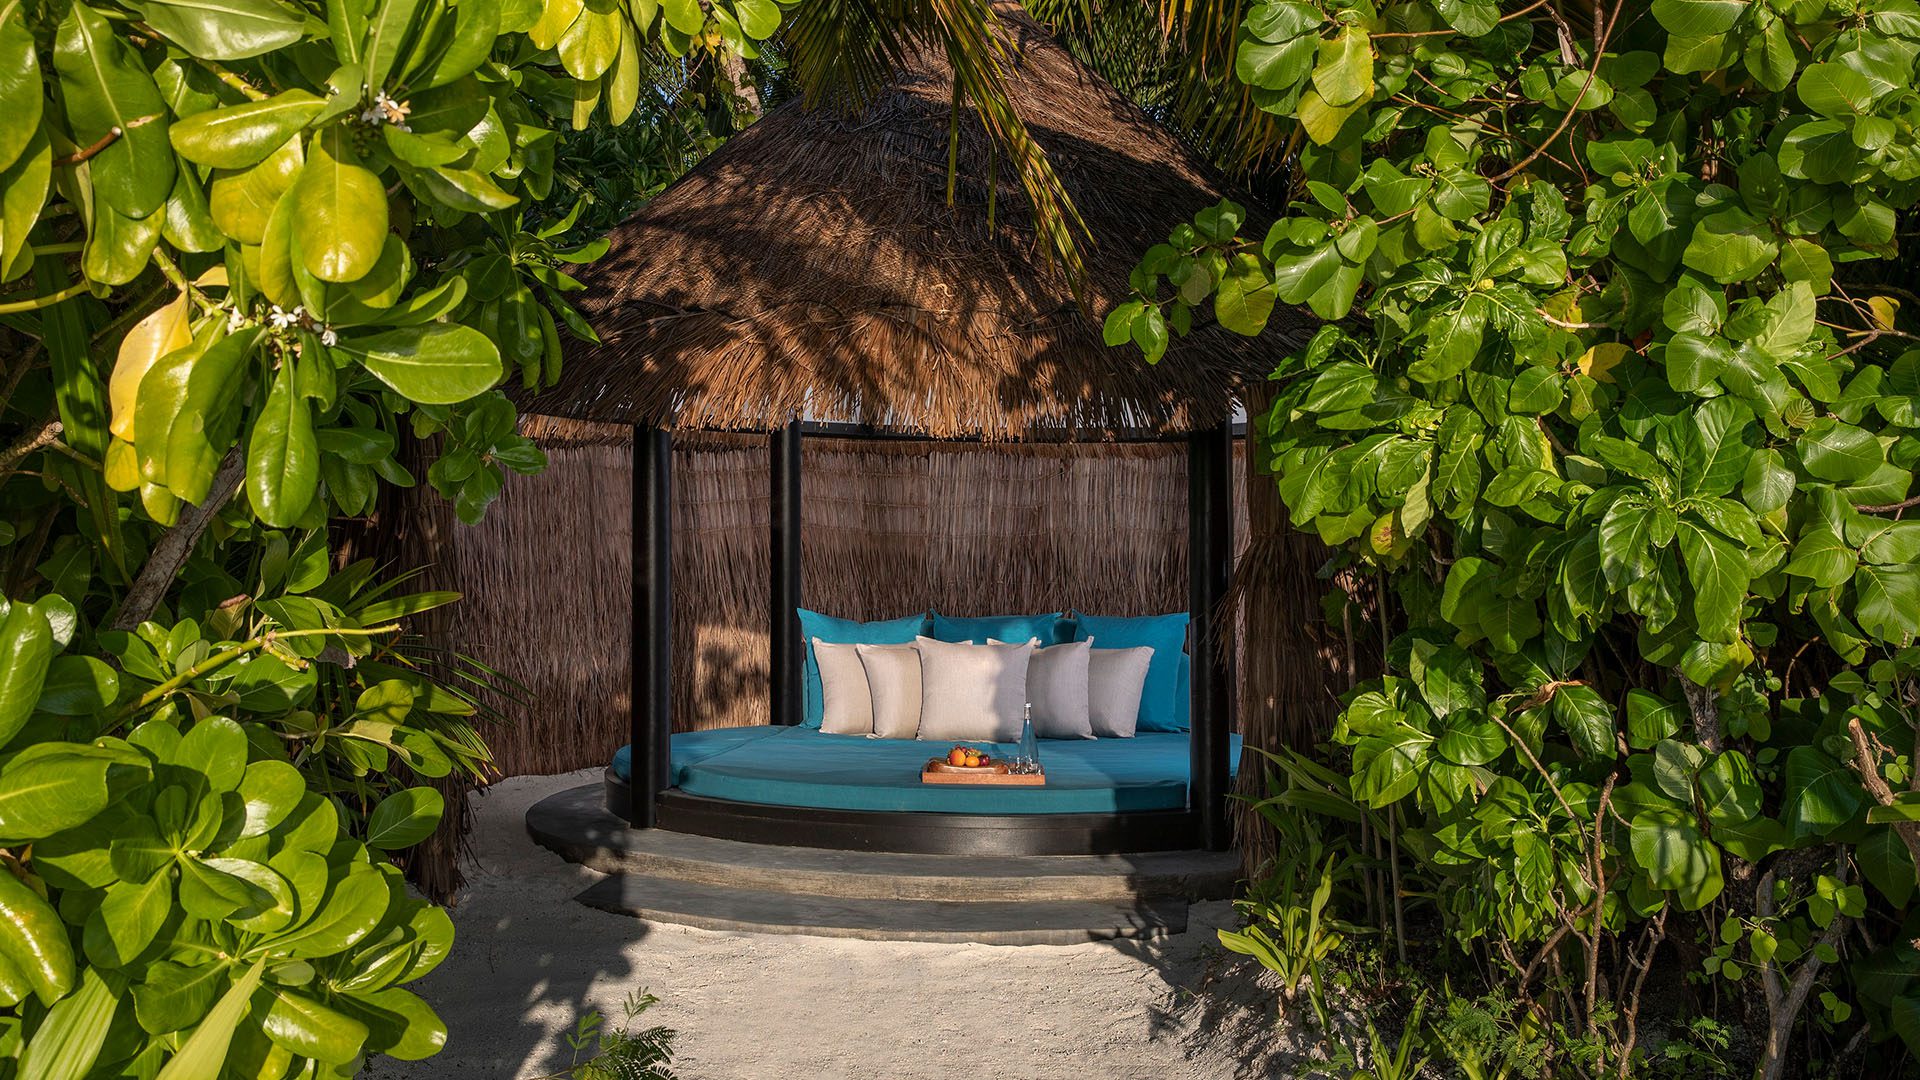 Maldives’ Luxury Resort Naladhu Reopens with a Refreshed Look & Experiences